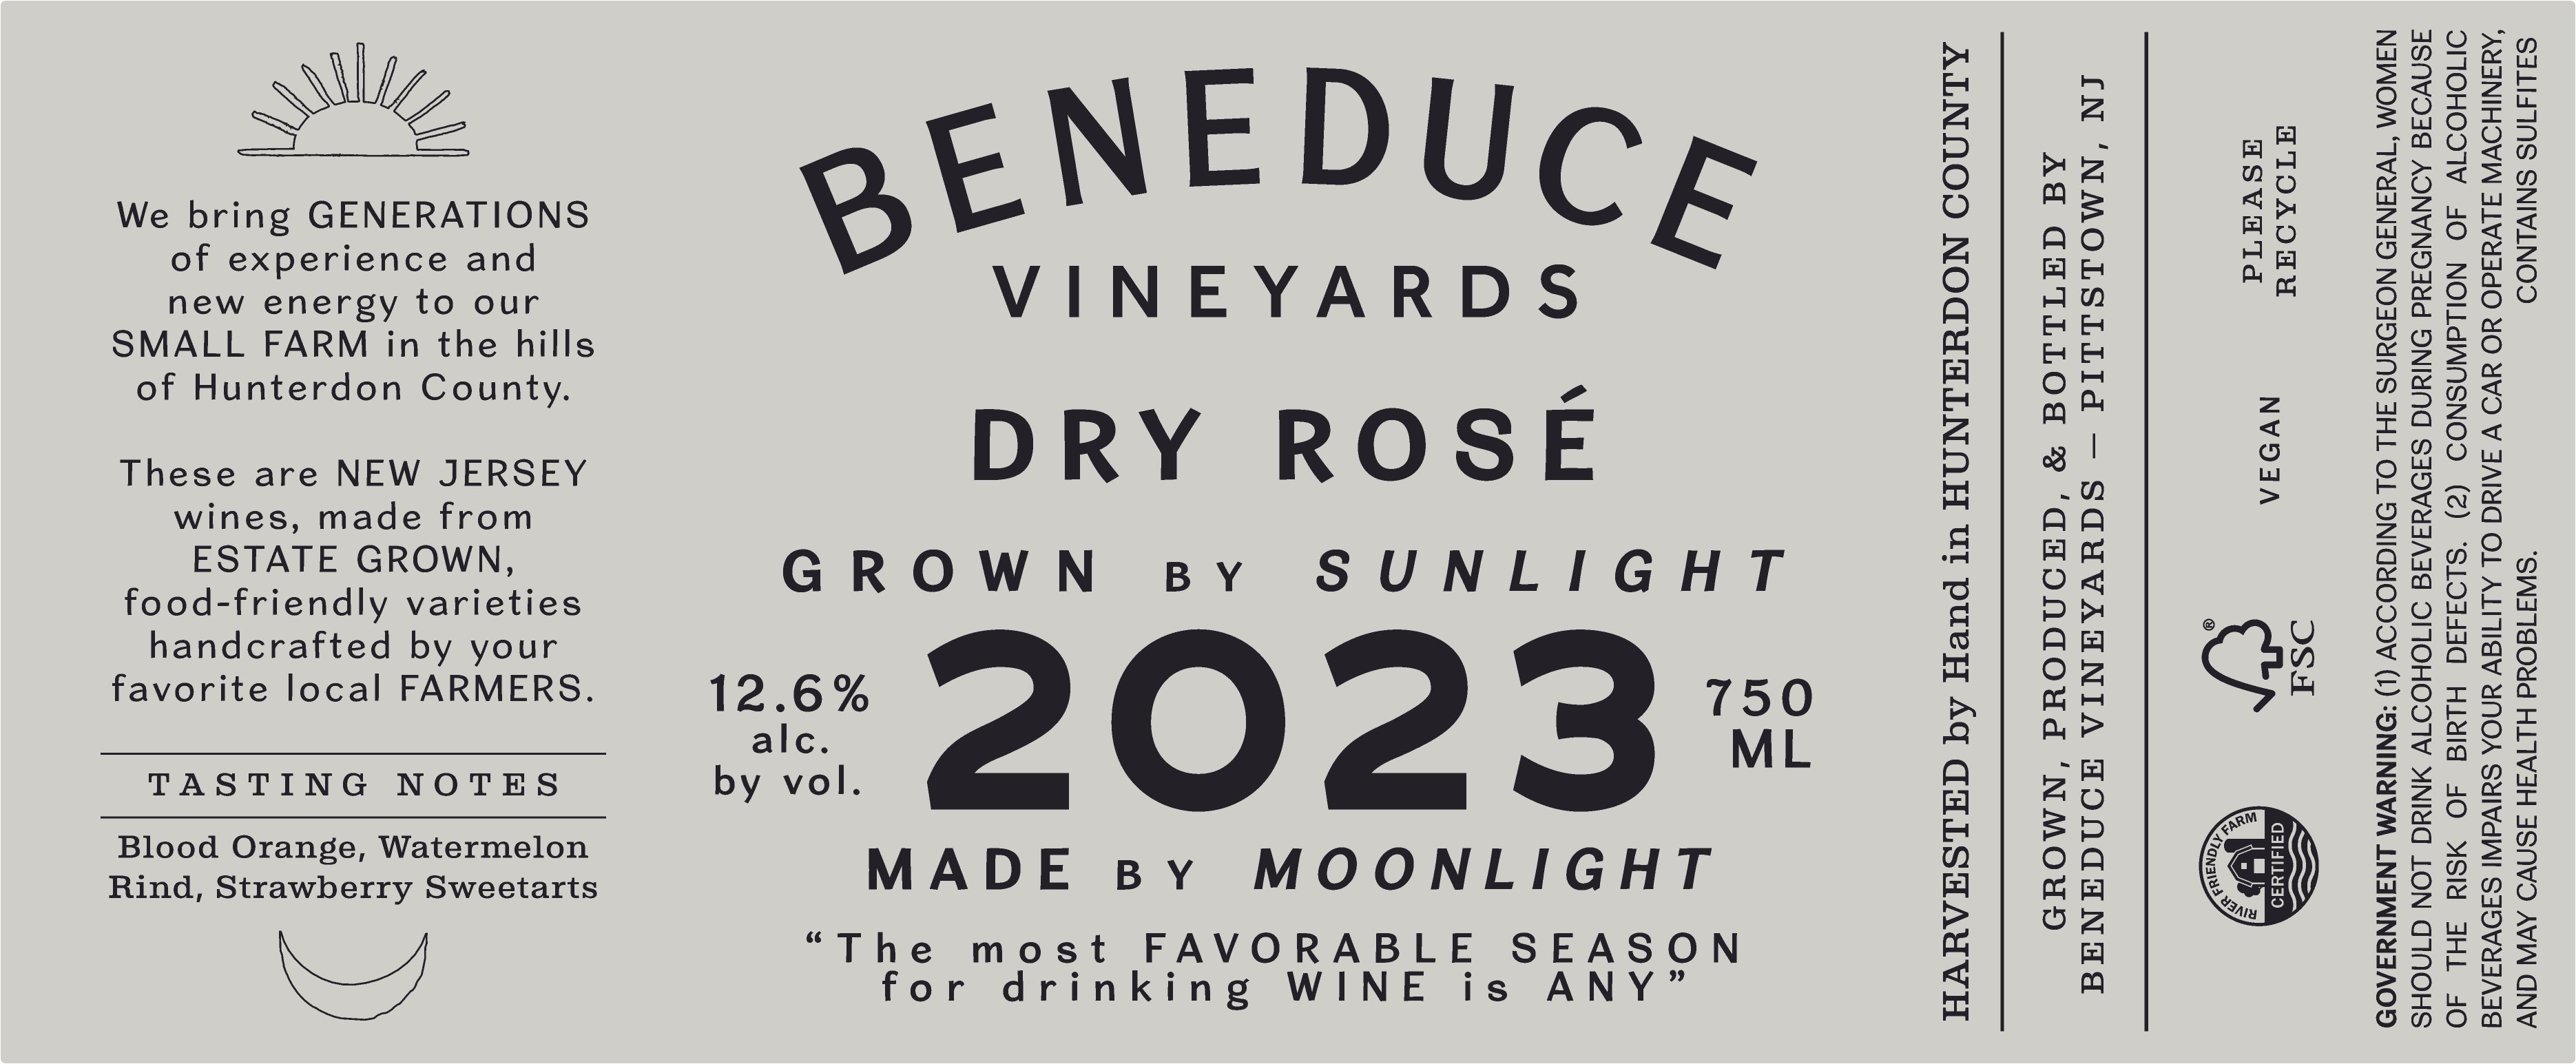 Product Image for 2023 Dry Rosé